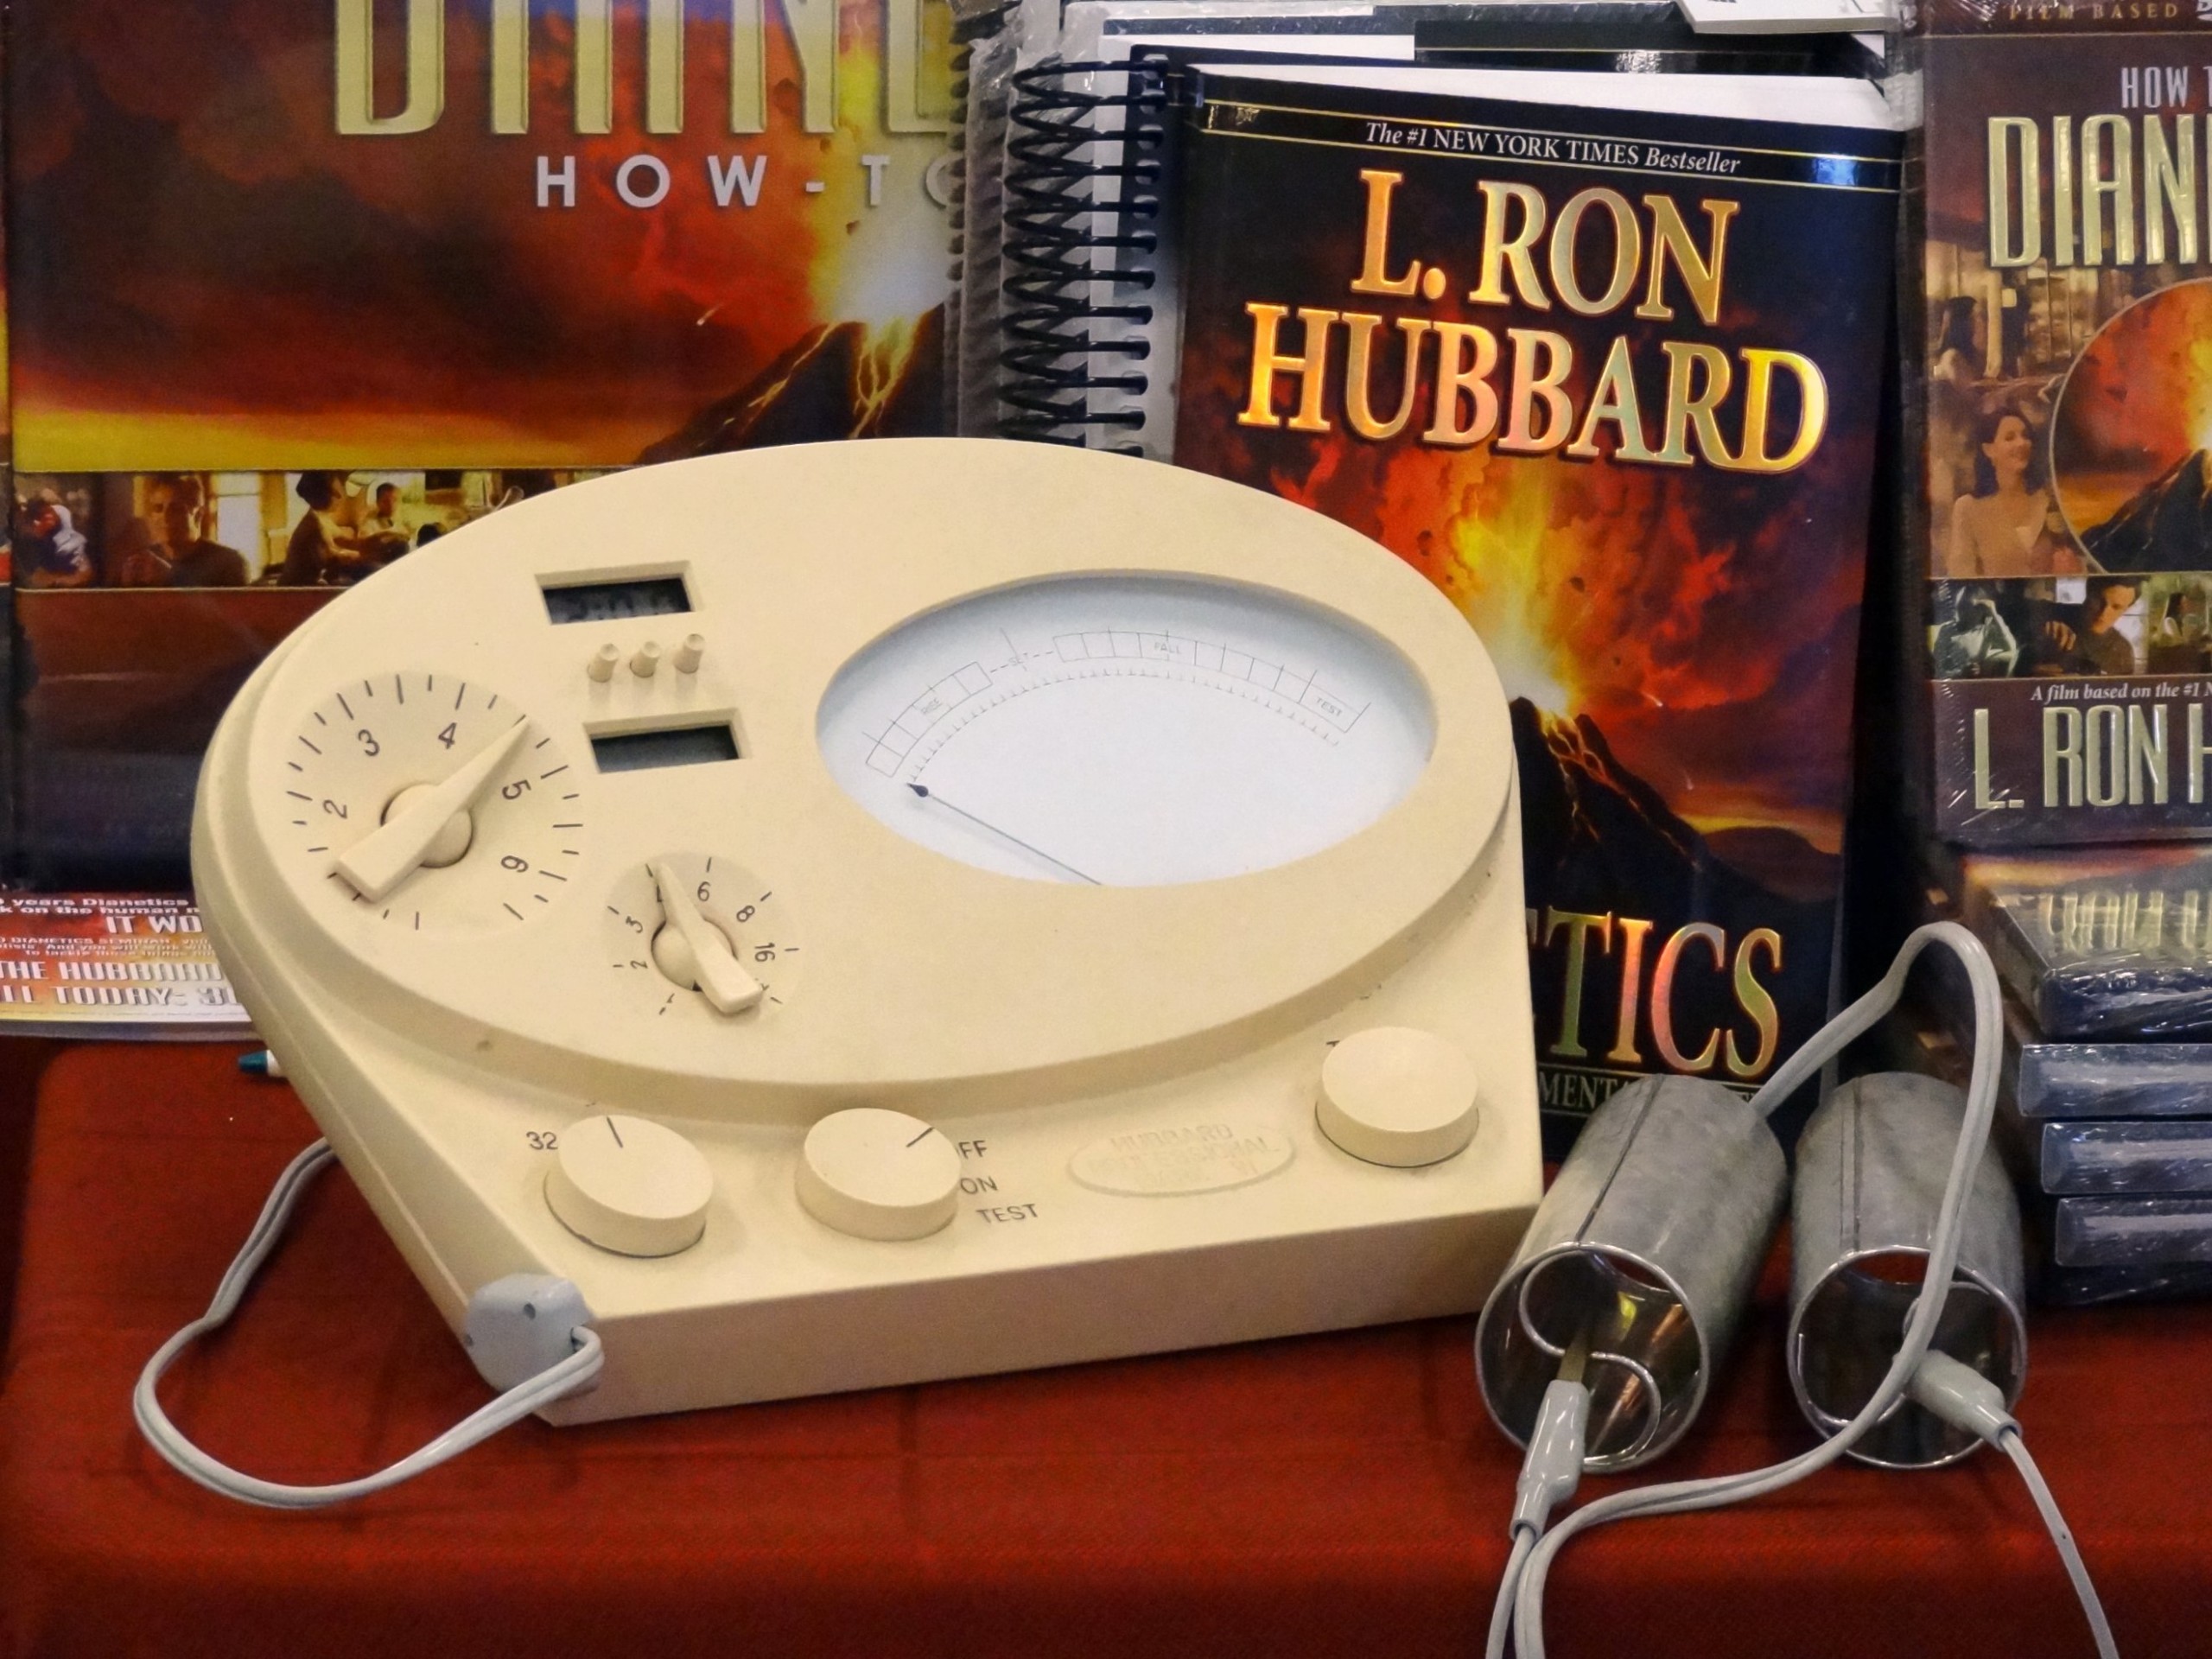 scientology books and e-meter